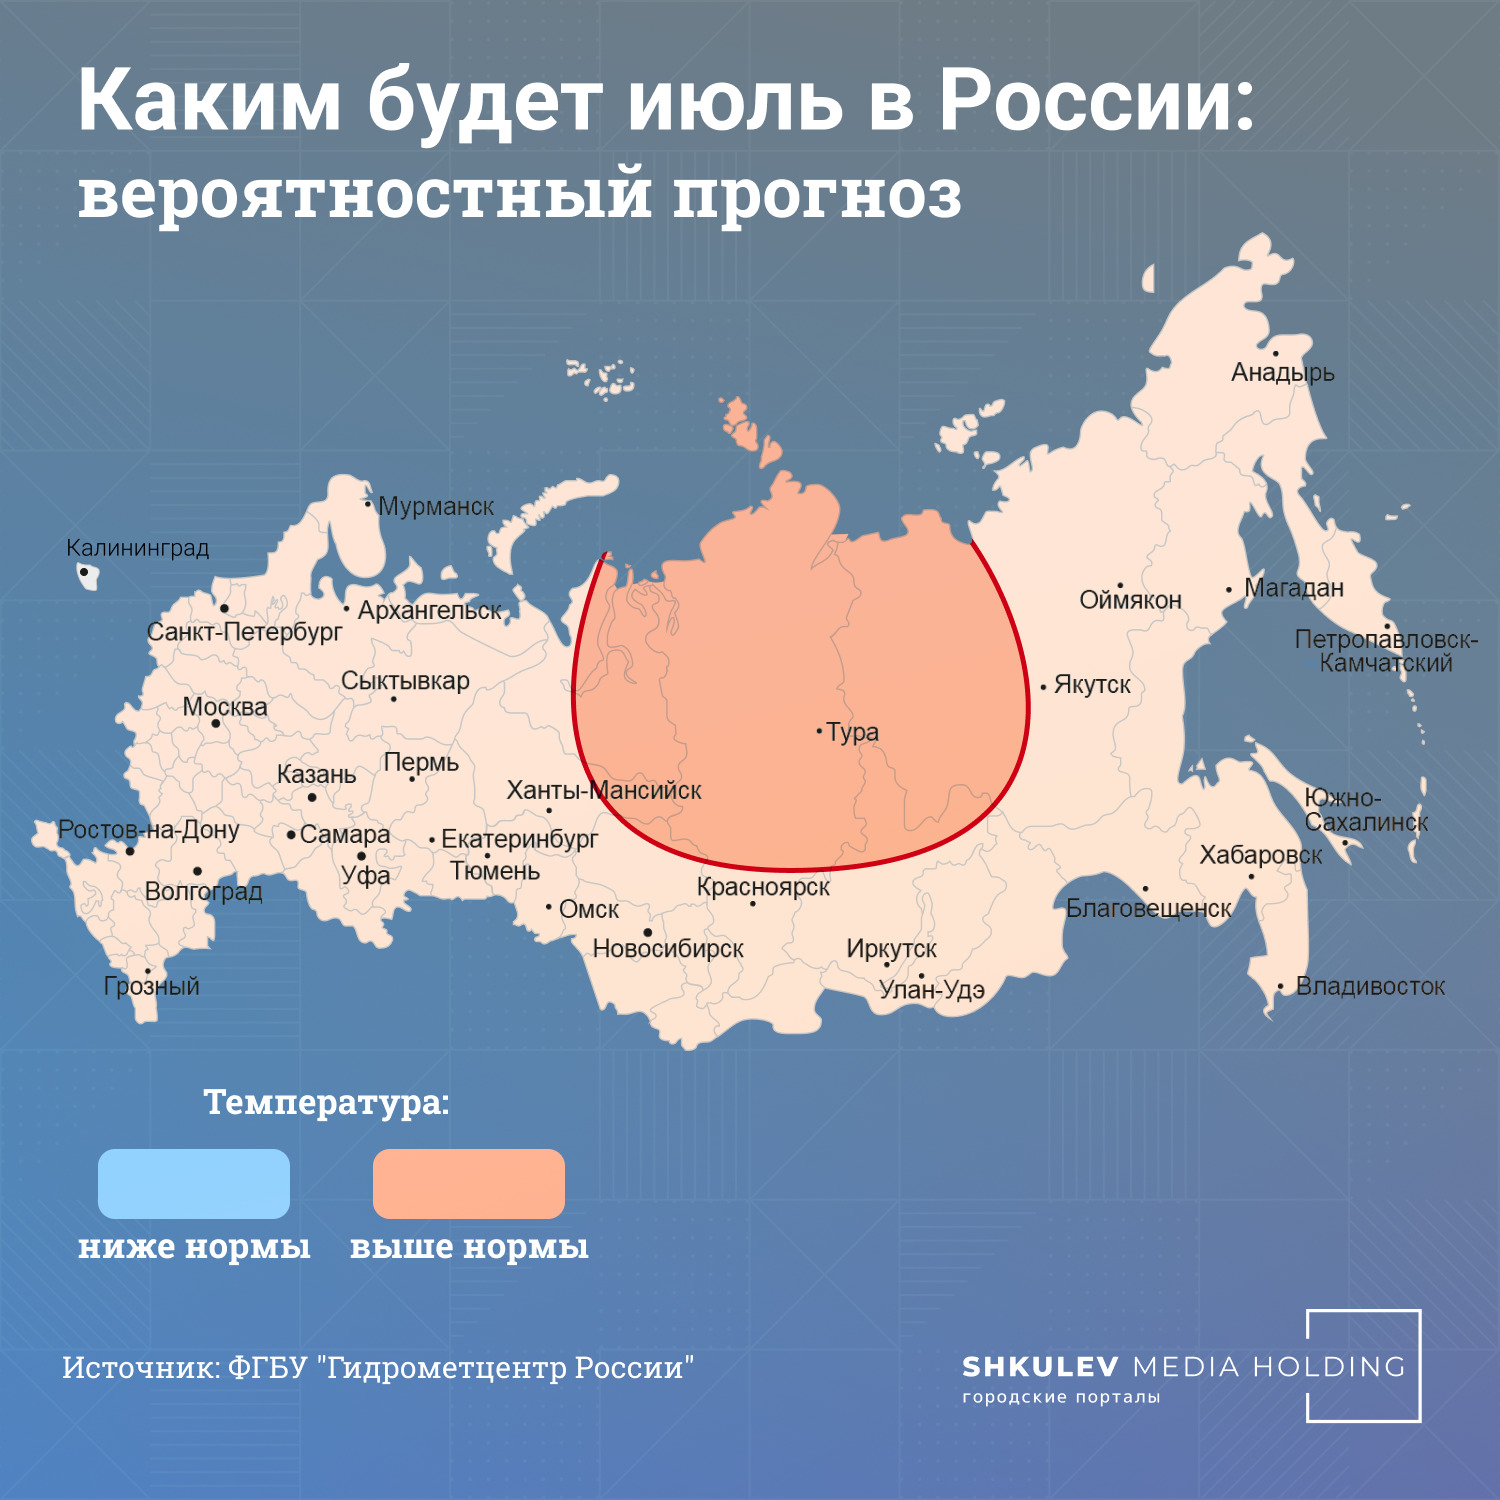 In July, in the European territory of Russia, the temperature will remain close to normal